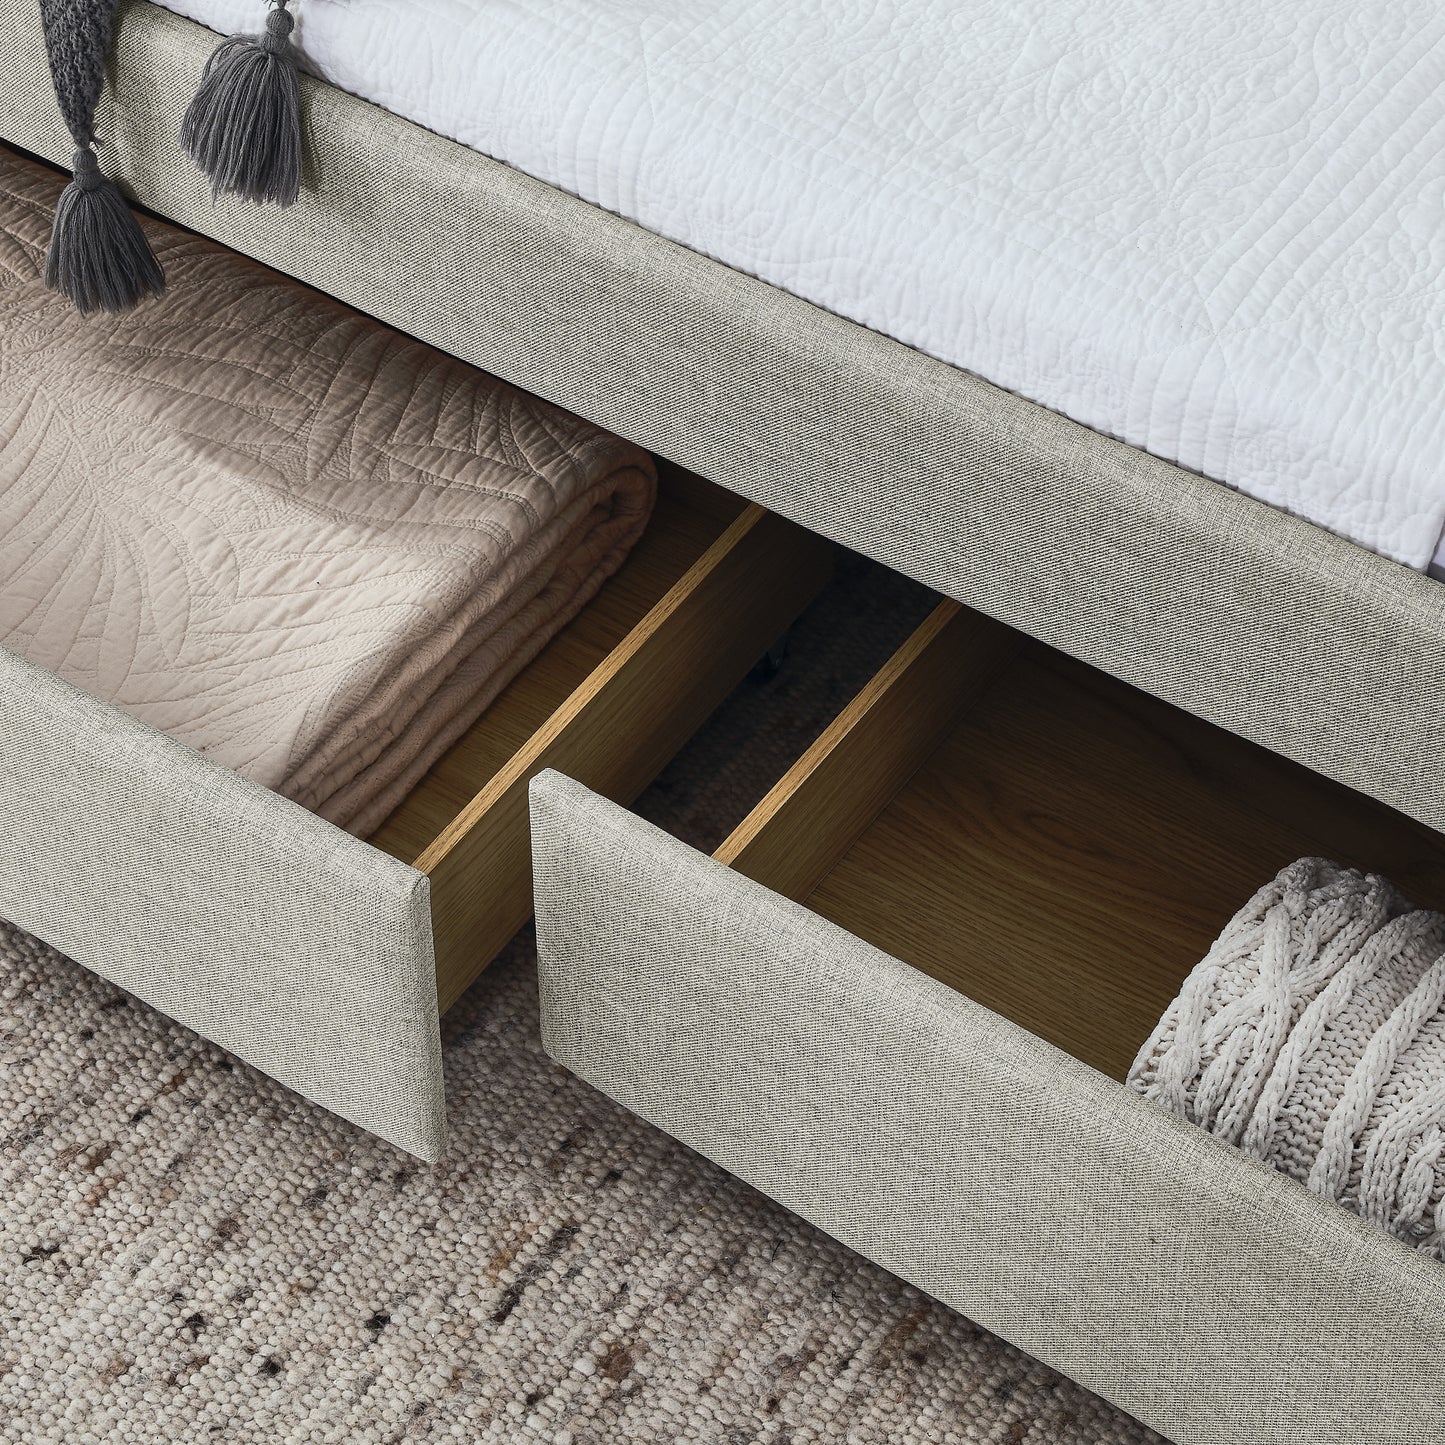 upholstered full size bed with two drawers, beige